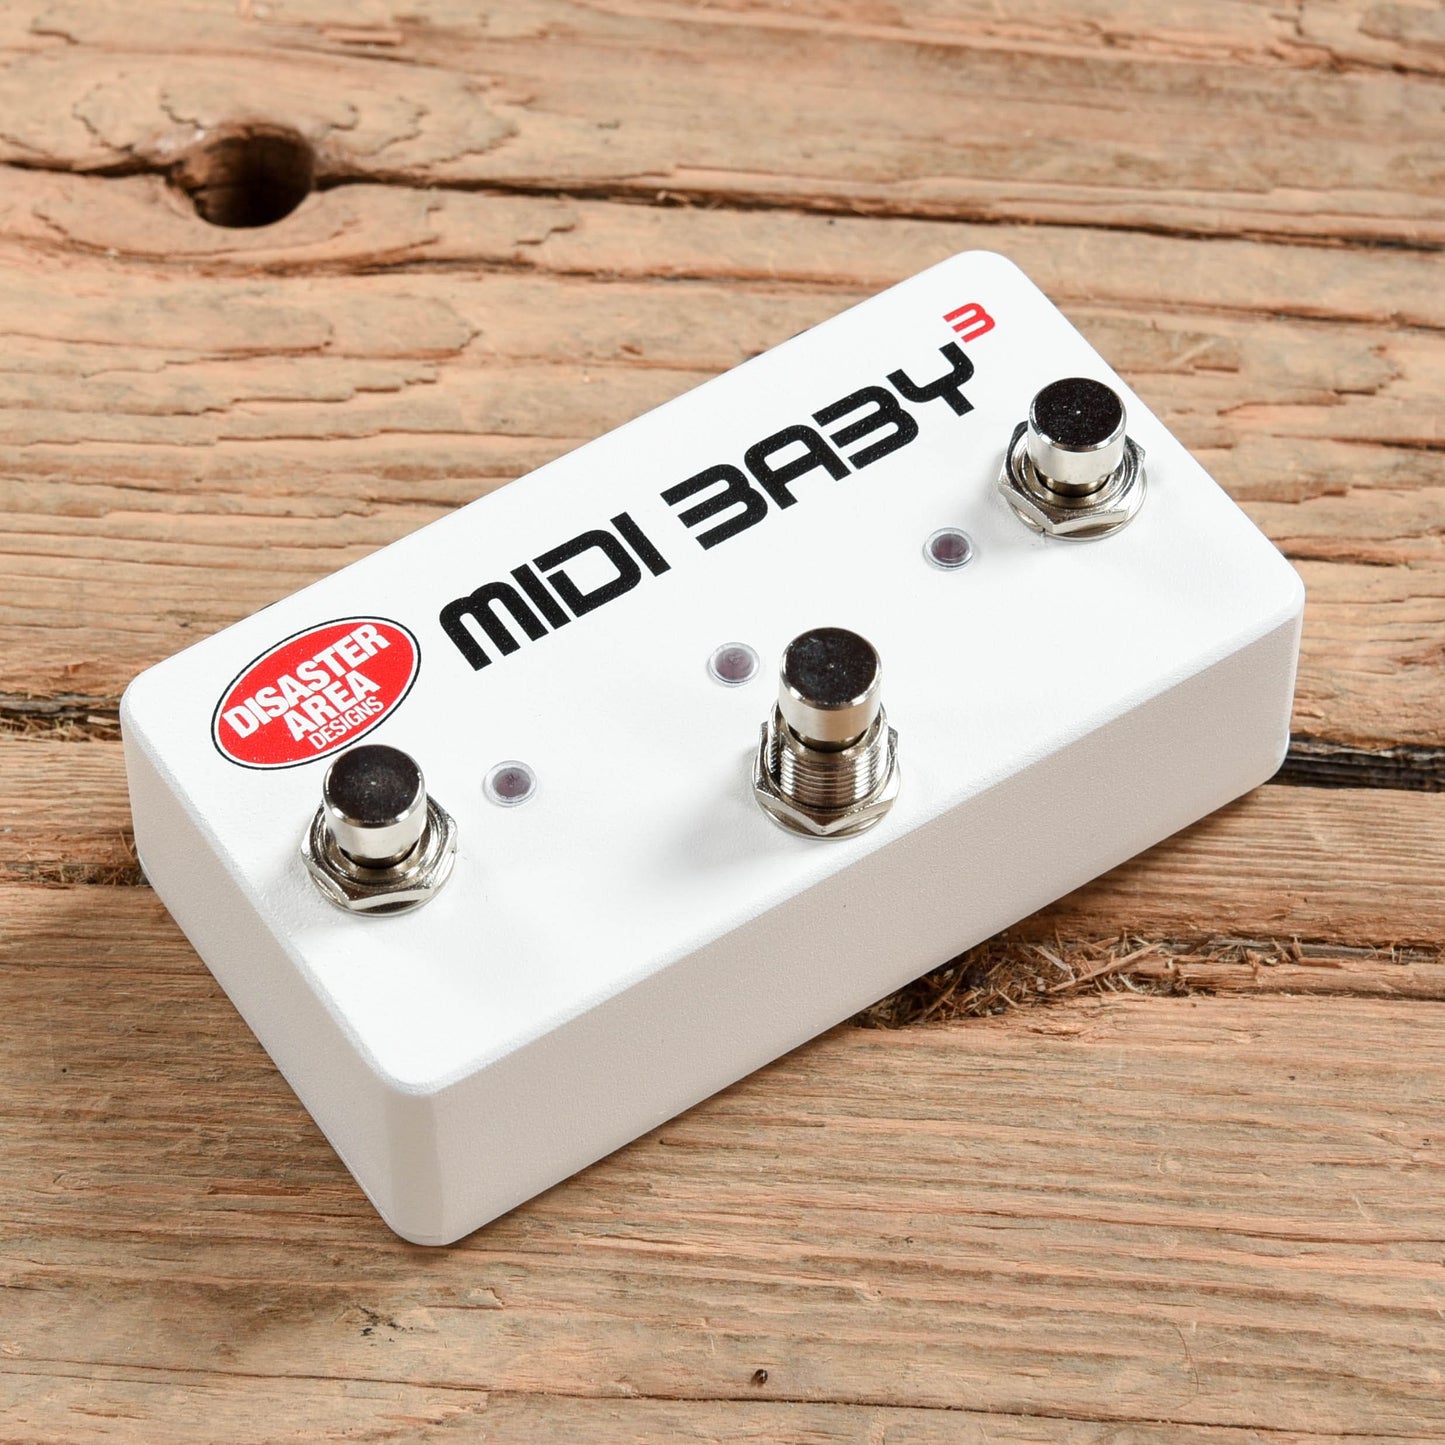 Disaster Area MIDI Baby 3 Effects and Pedals / Controllers, Volume and Expression